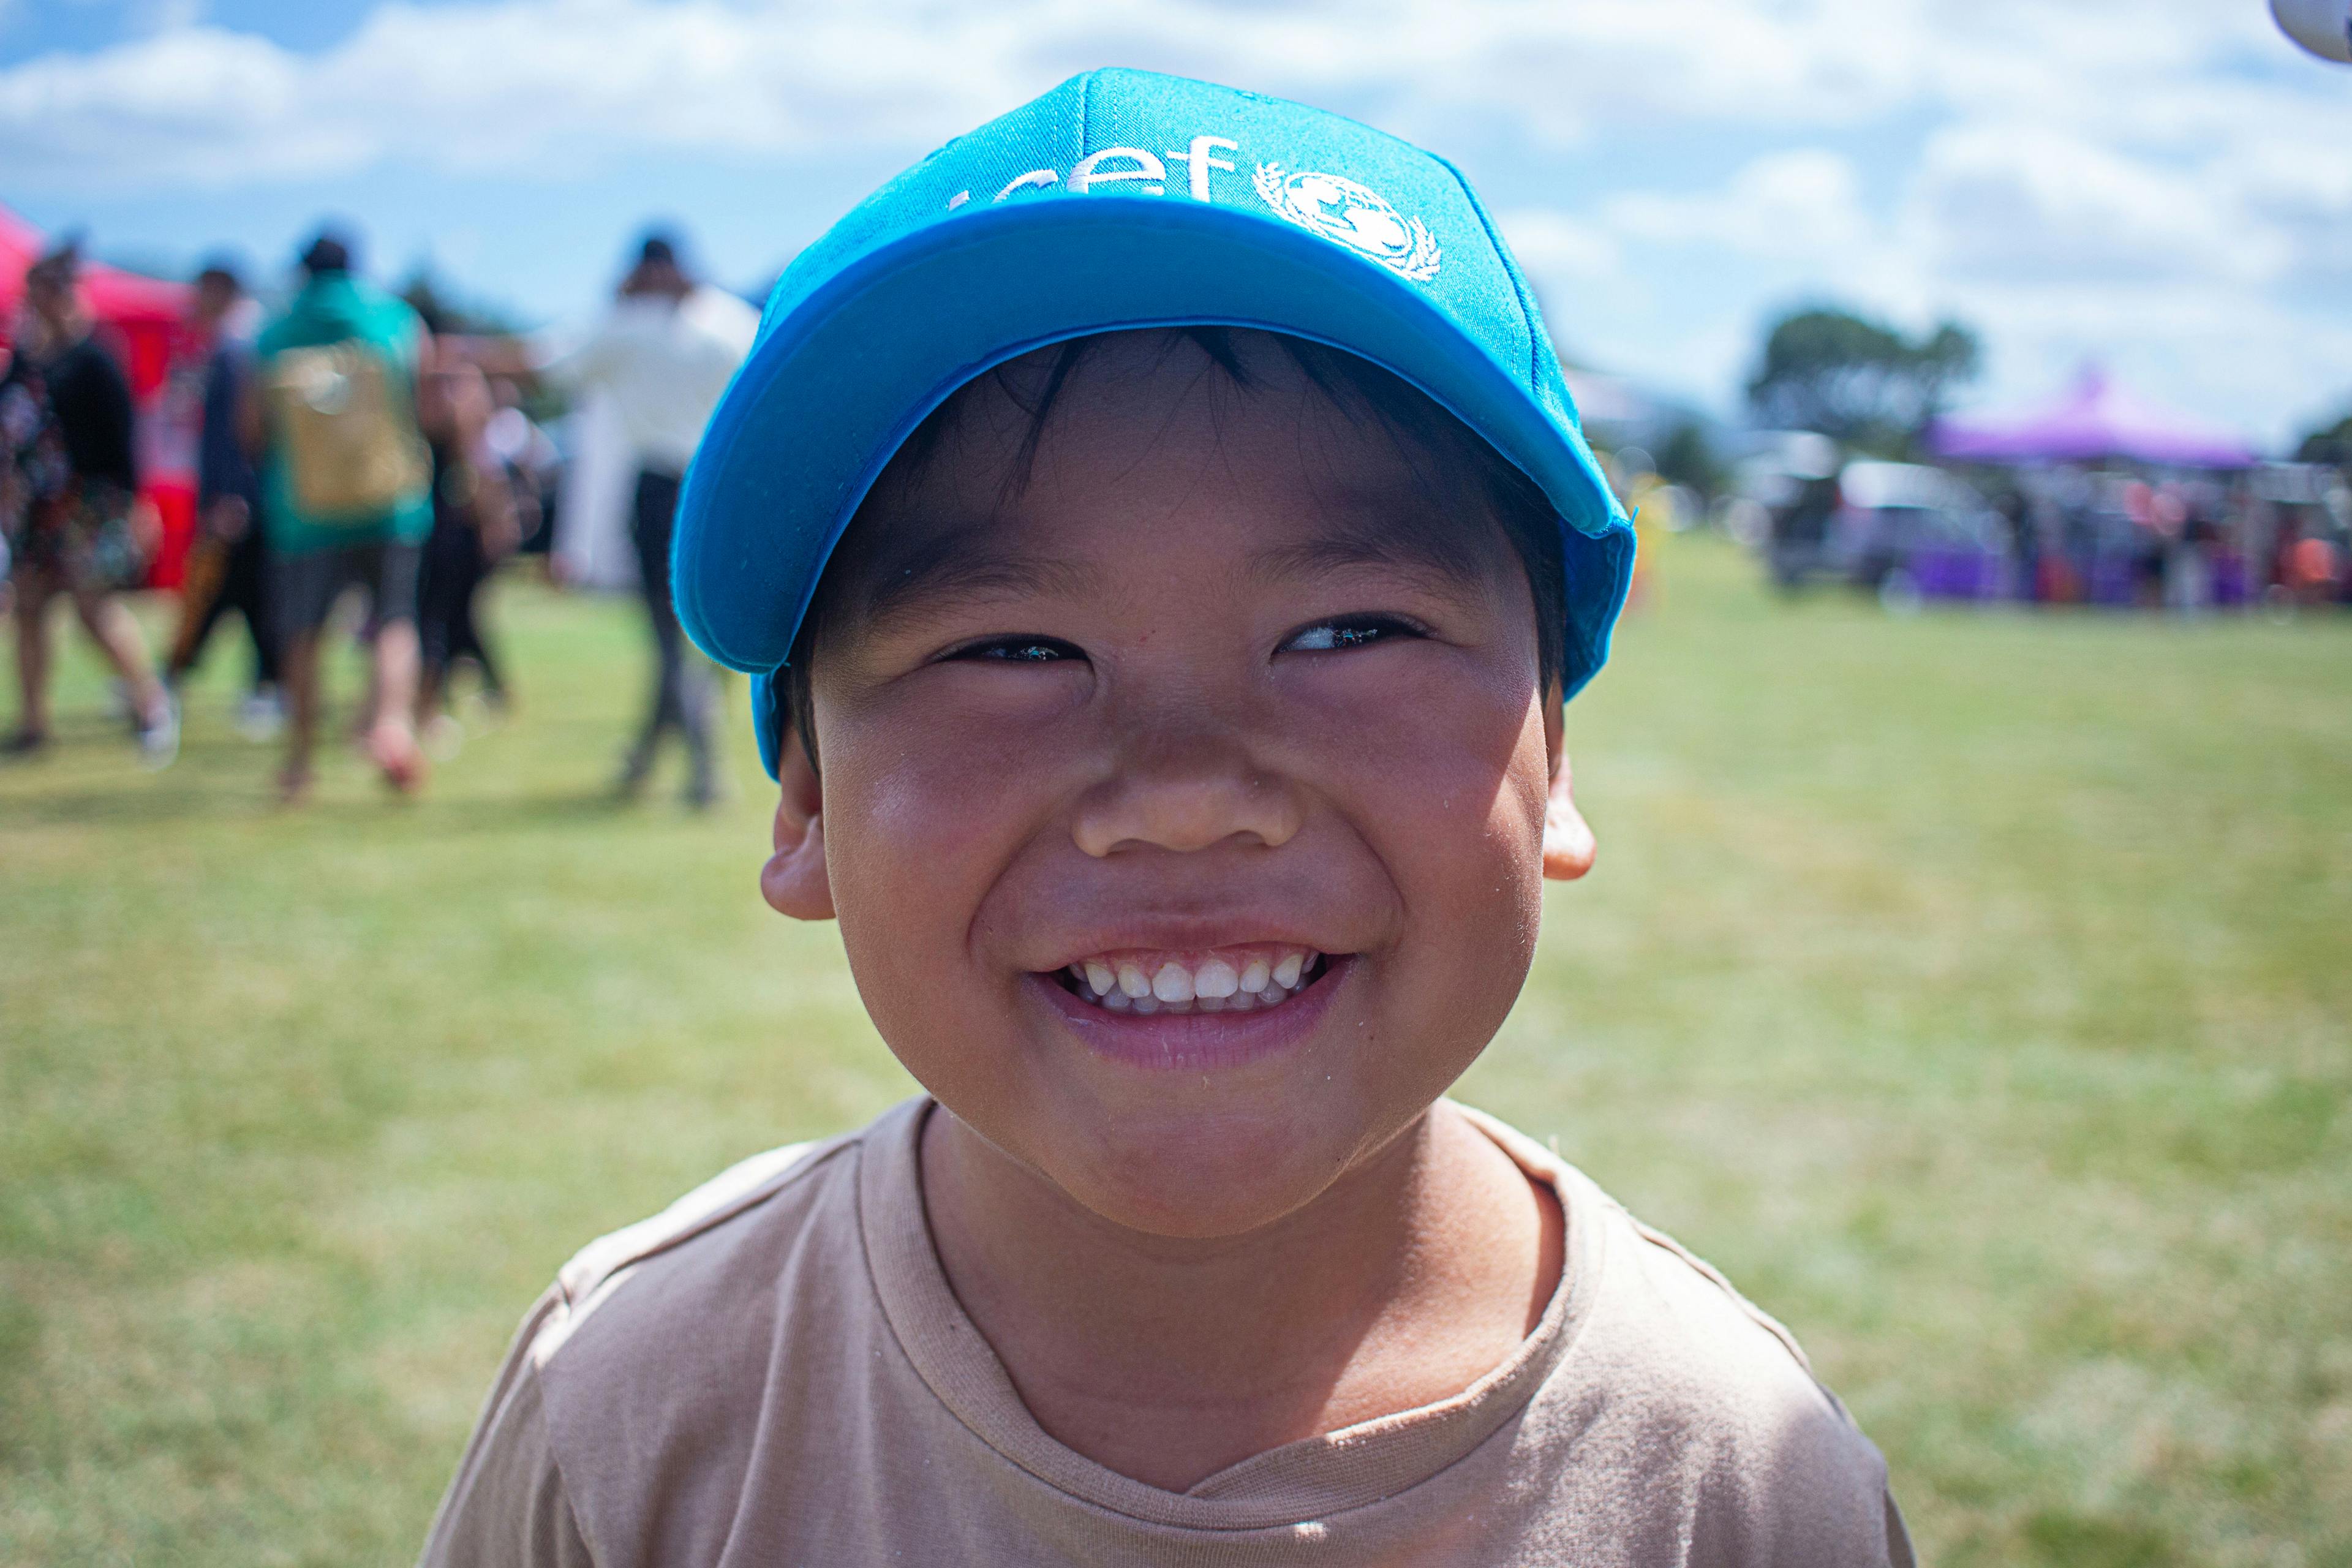 A young boy smiles at UNICEF children's day